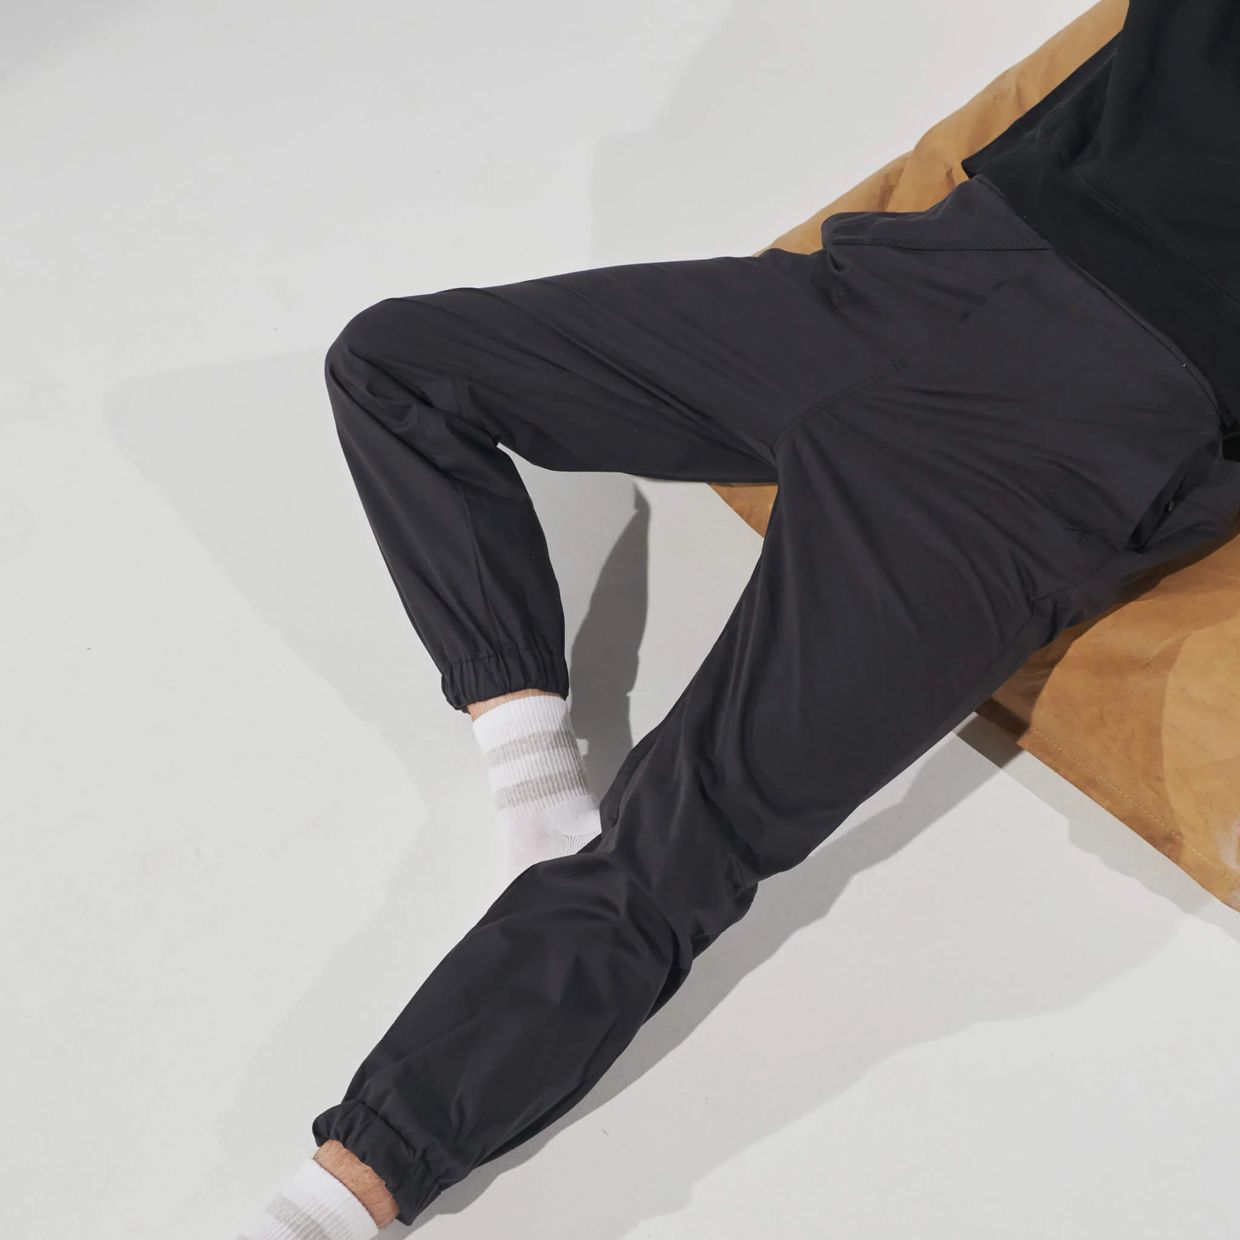 Tropicfeel Made Jogging Pants That at Great at Both Chilling and Trekking